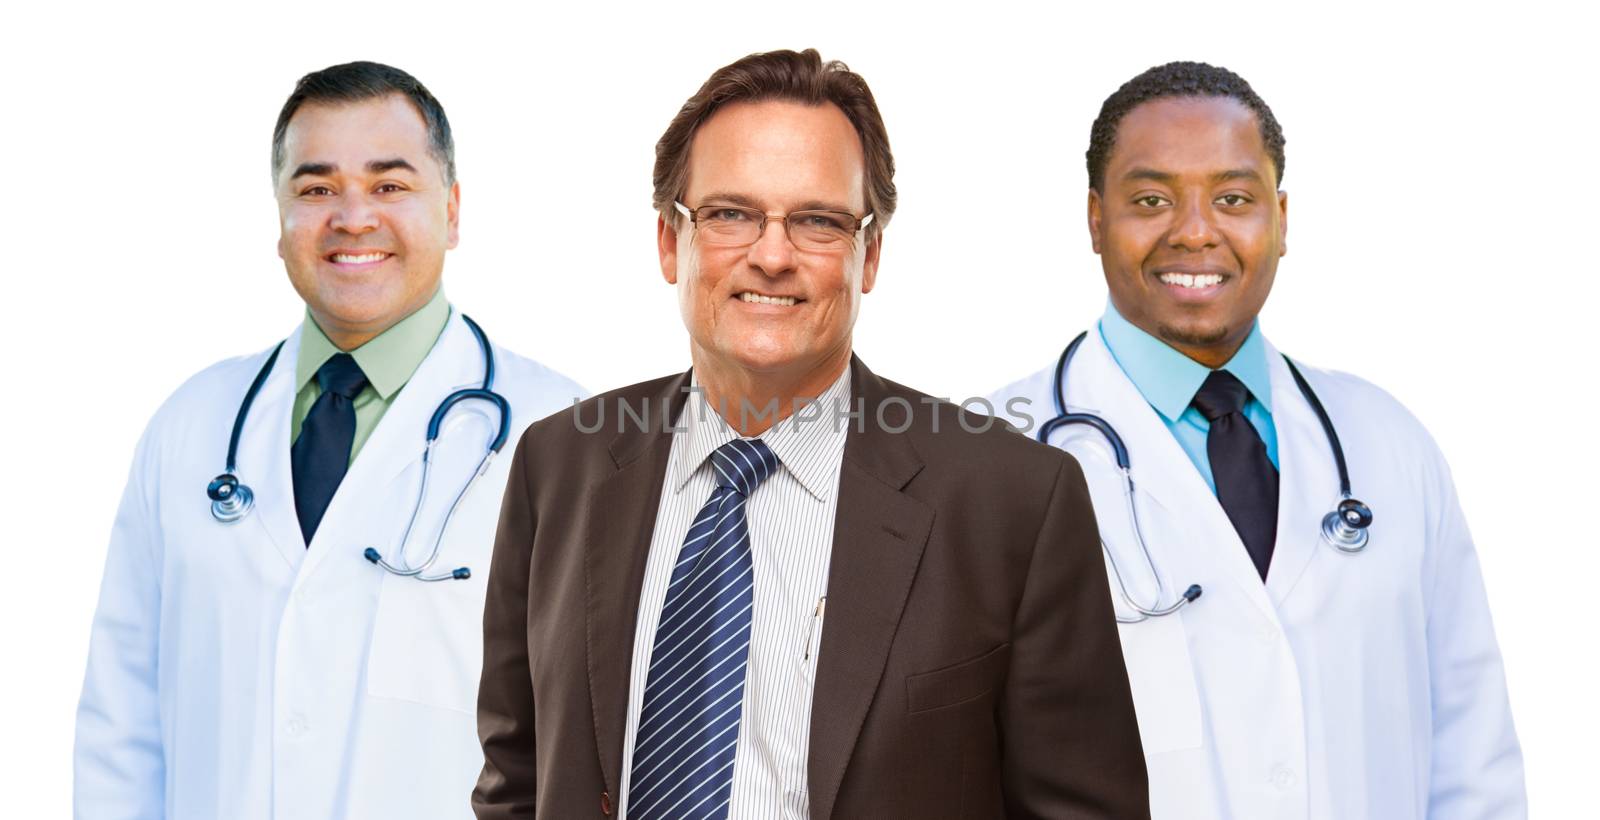 Two Mixed Race Doctors Behind Businessman  Isolated on White by Feverpitched